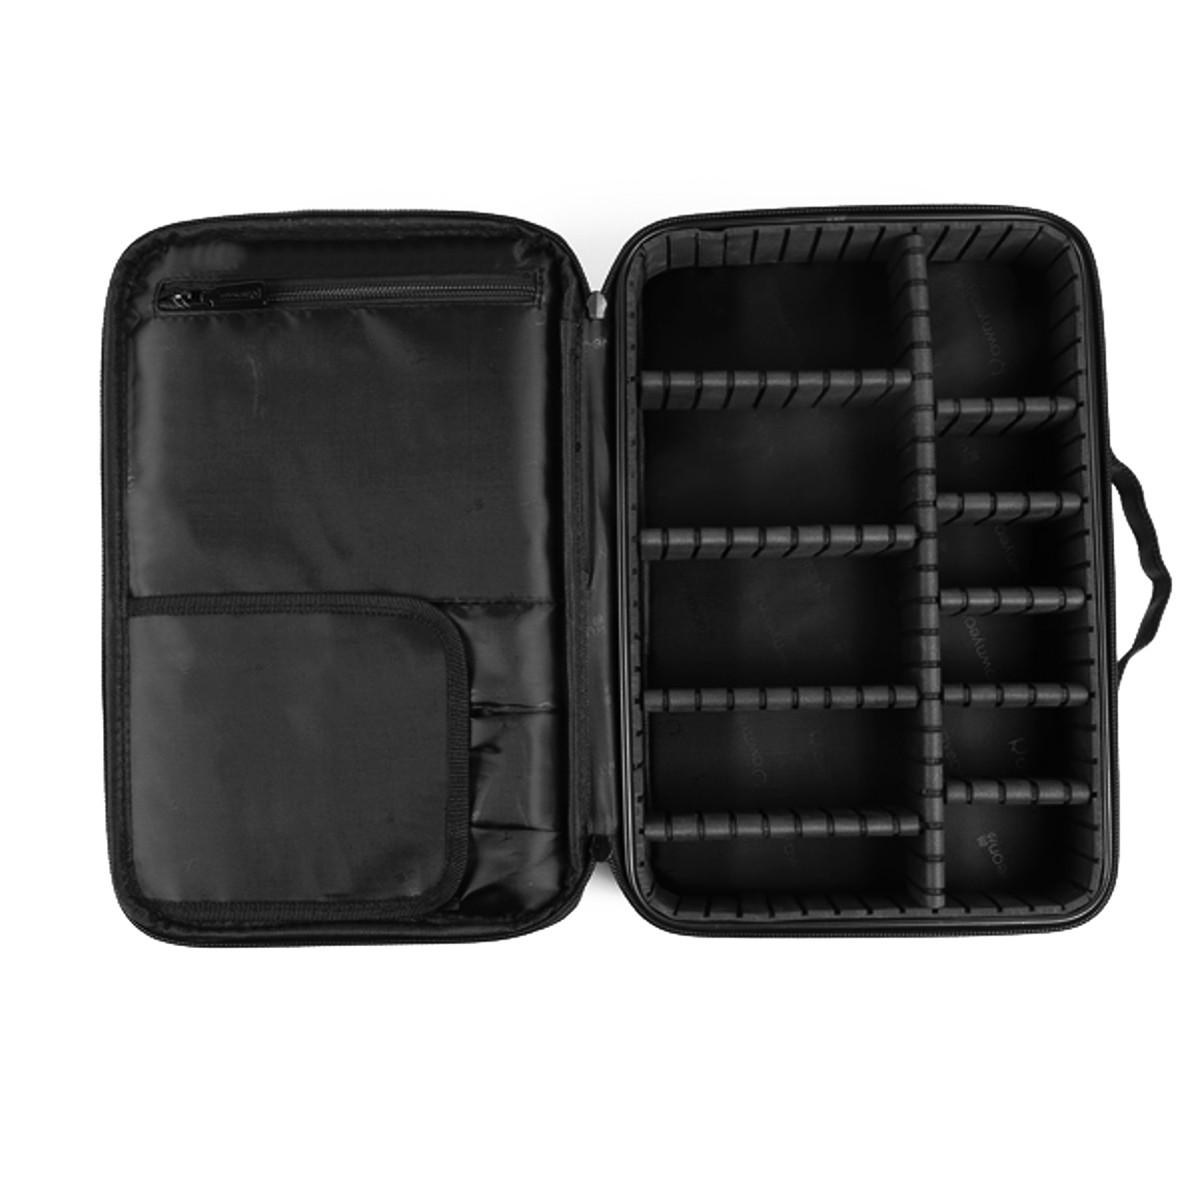 Detachable Makeup Bag Travel Toiletry Kit Portable Brushes Pouch Holder Storage Organizer Bags ...